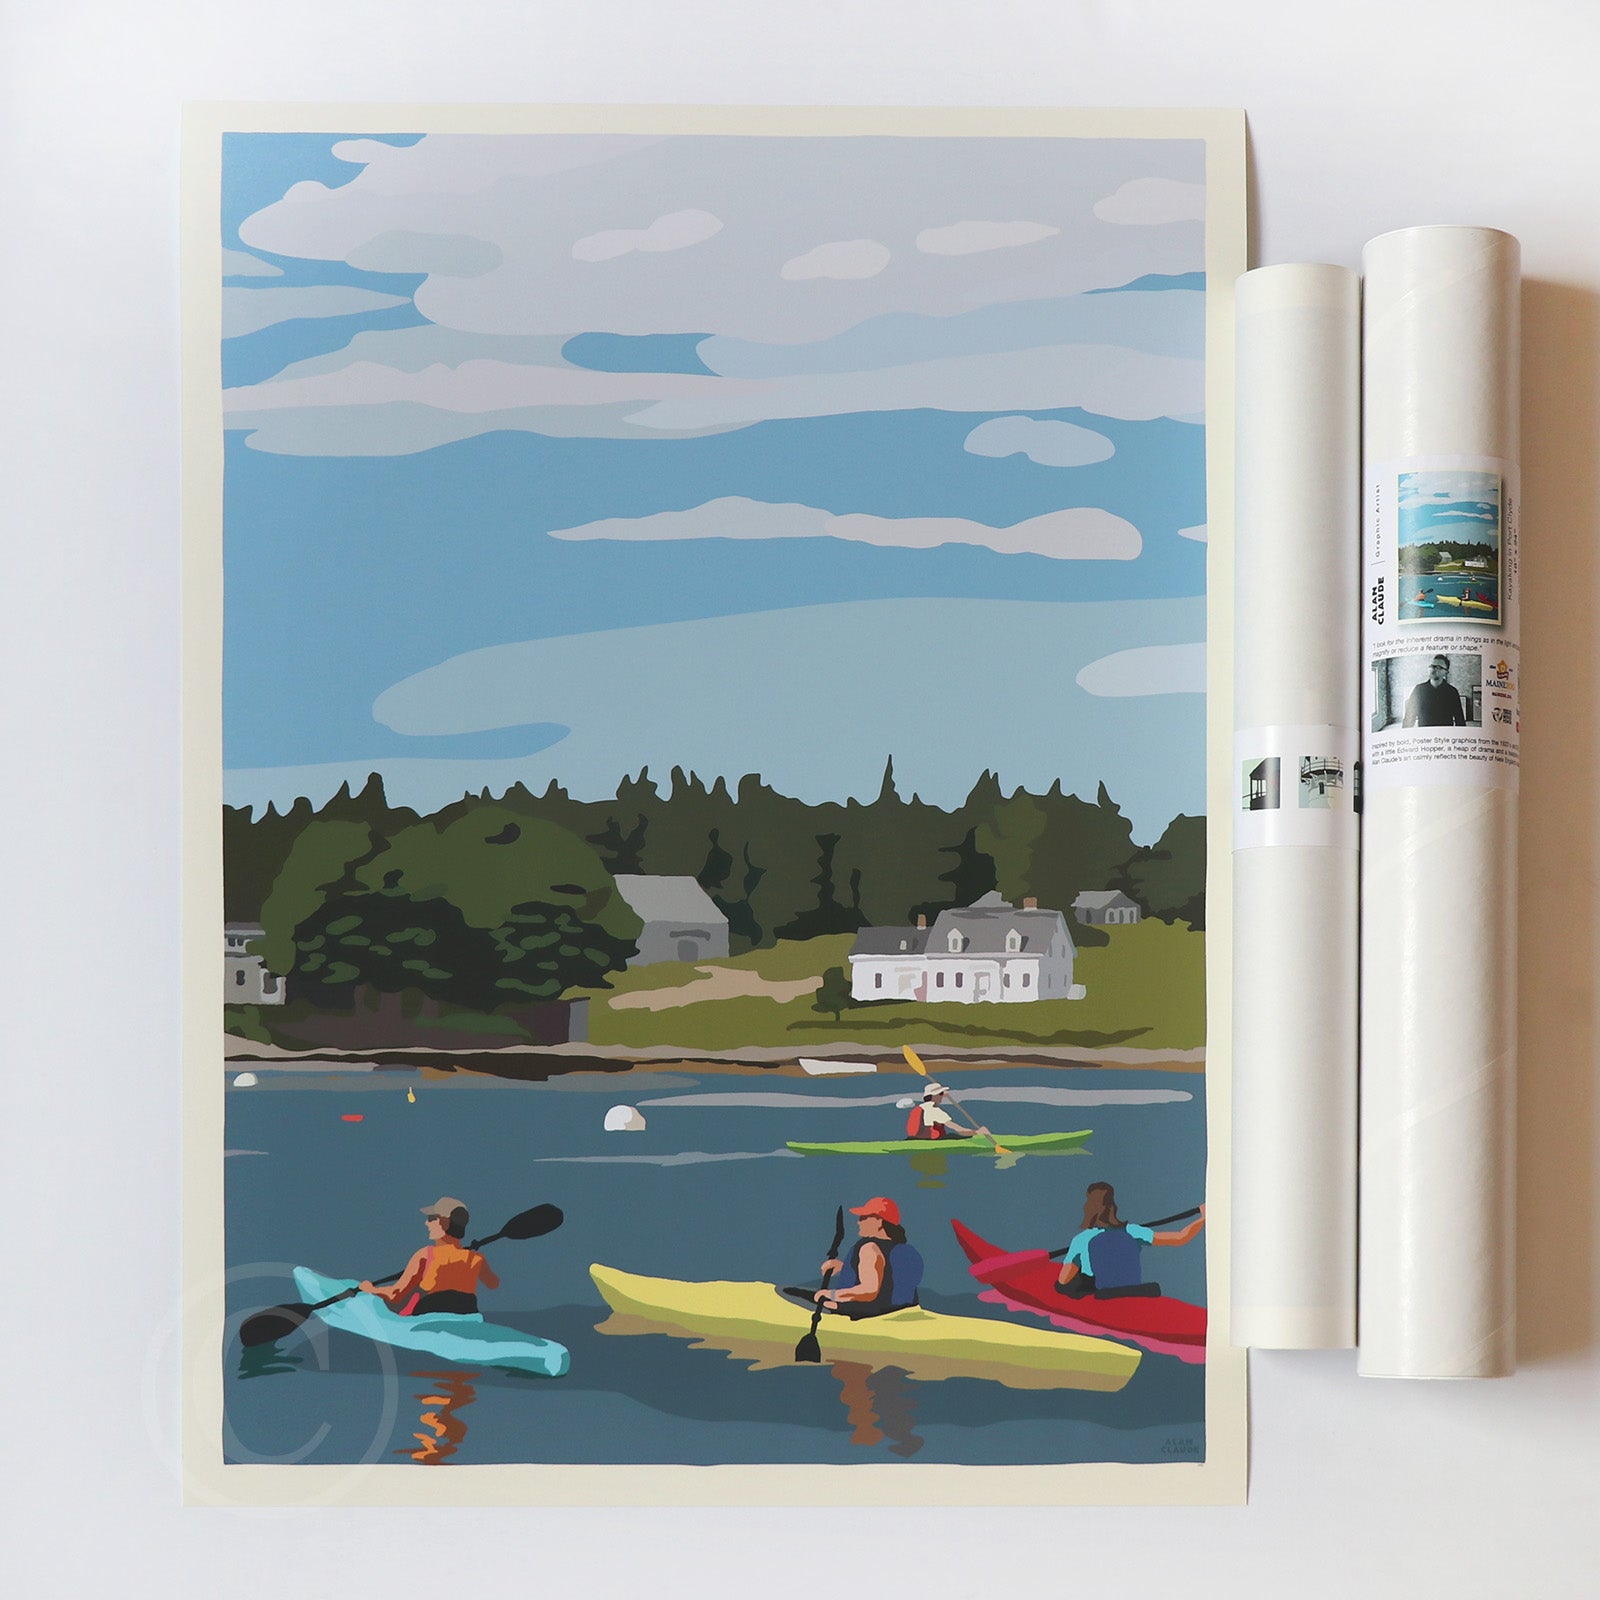 Kayaking in Port Clyde Art Print 18" x 24" Wall Poster By Alan Claude - Maine